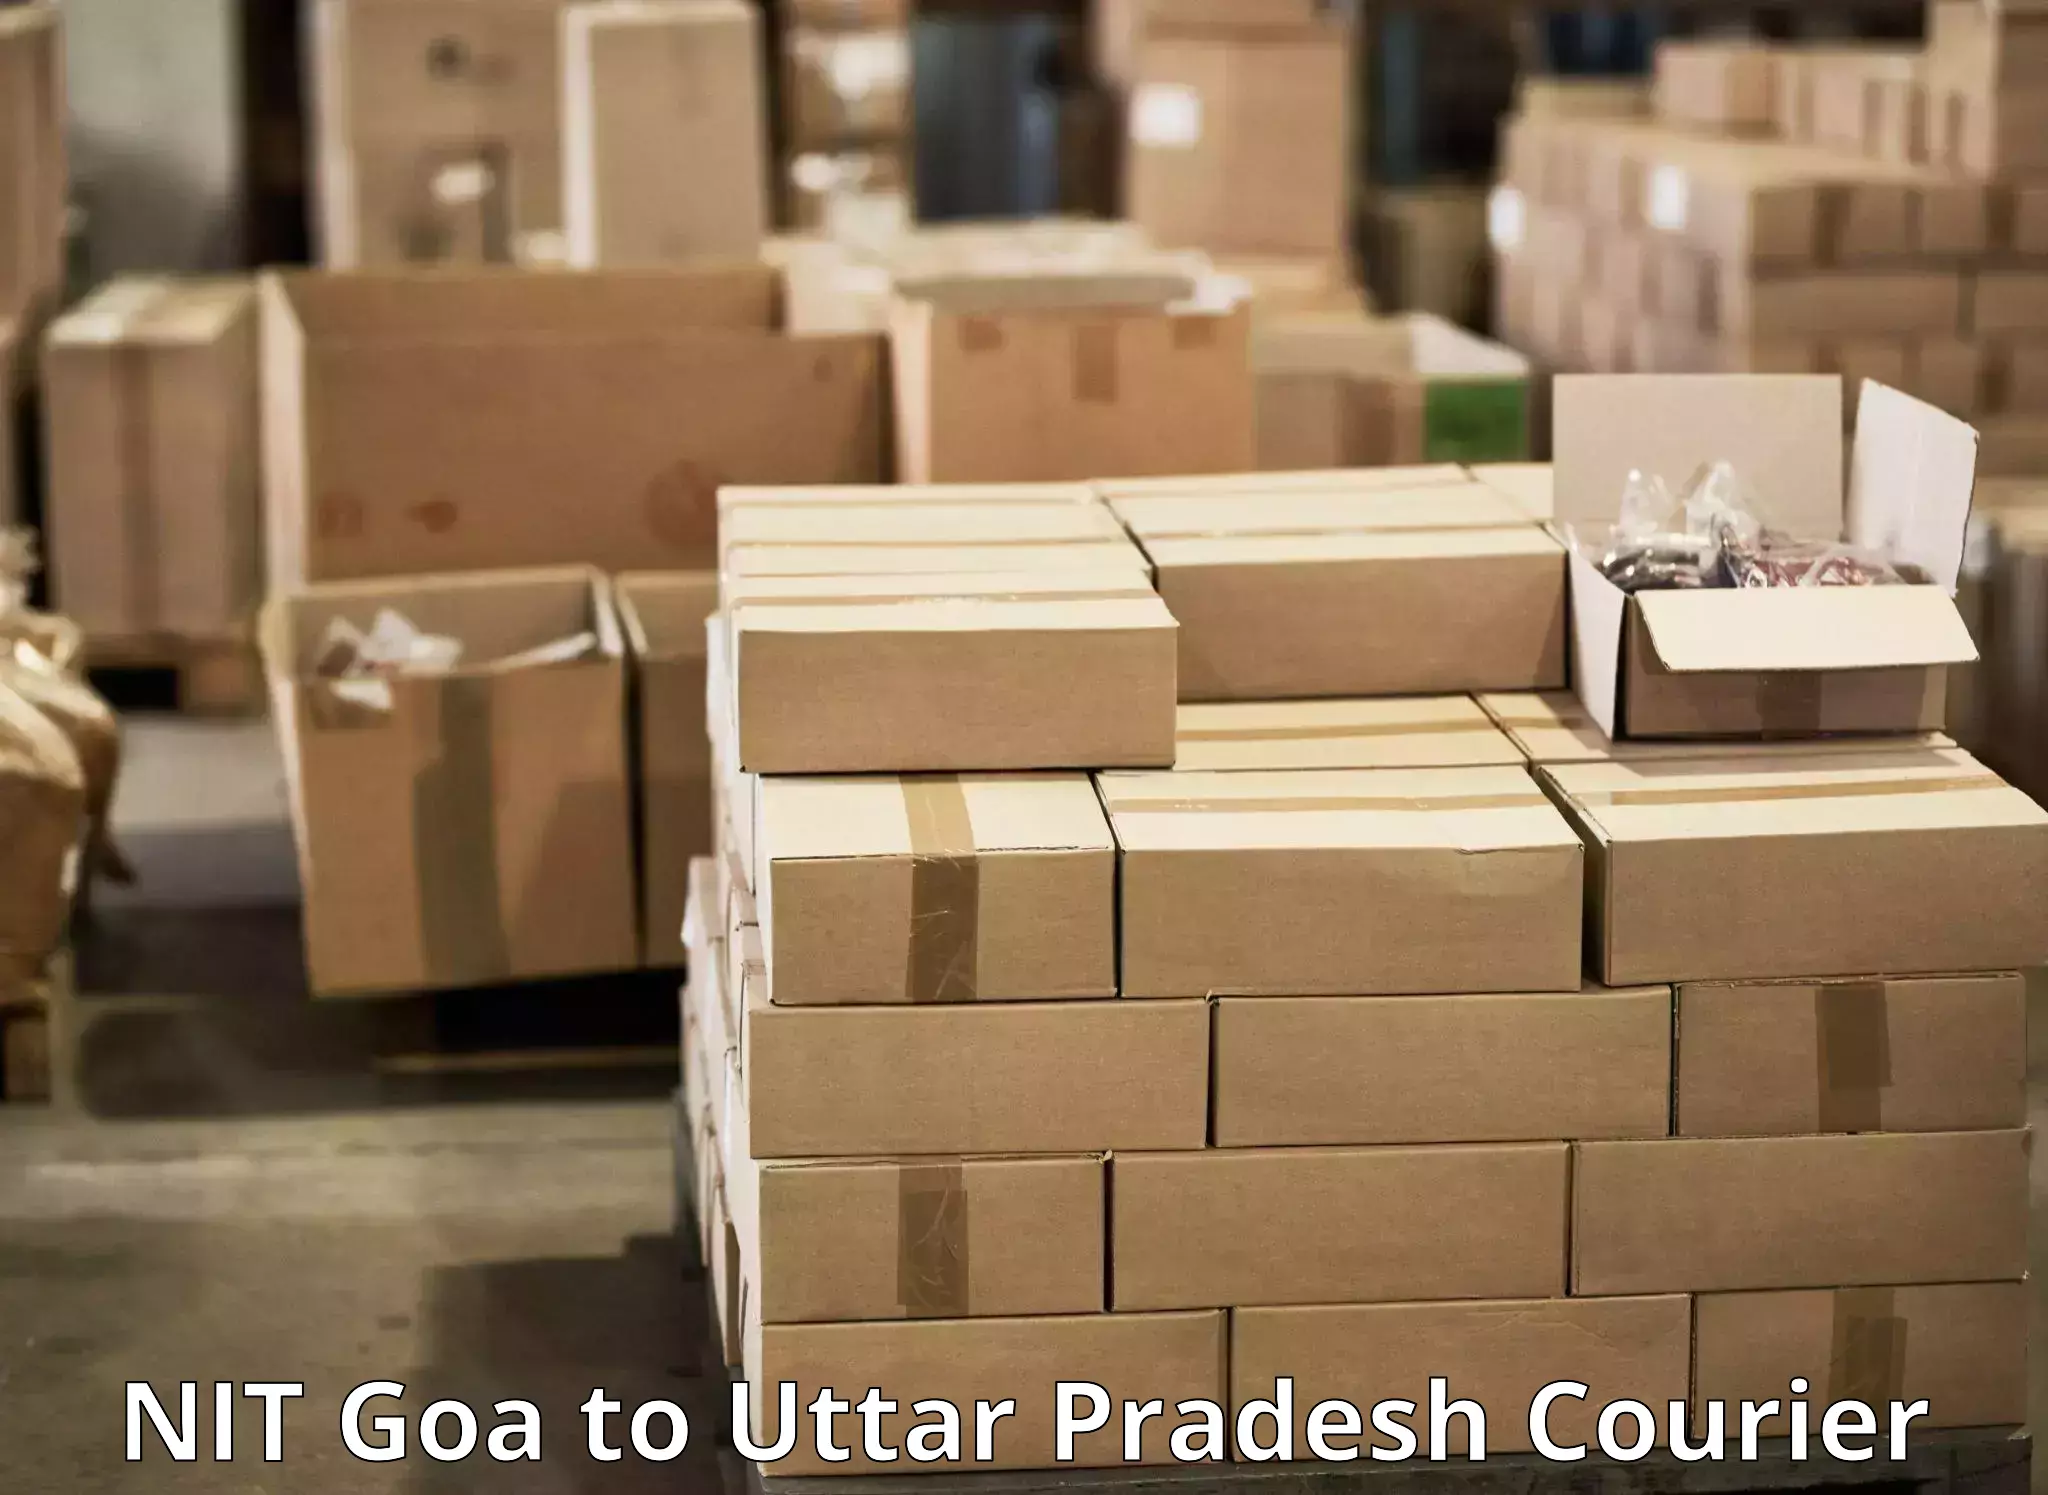 Express courier capabilities in NIT Goa to Pratapgarh